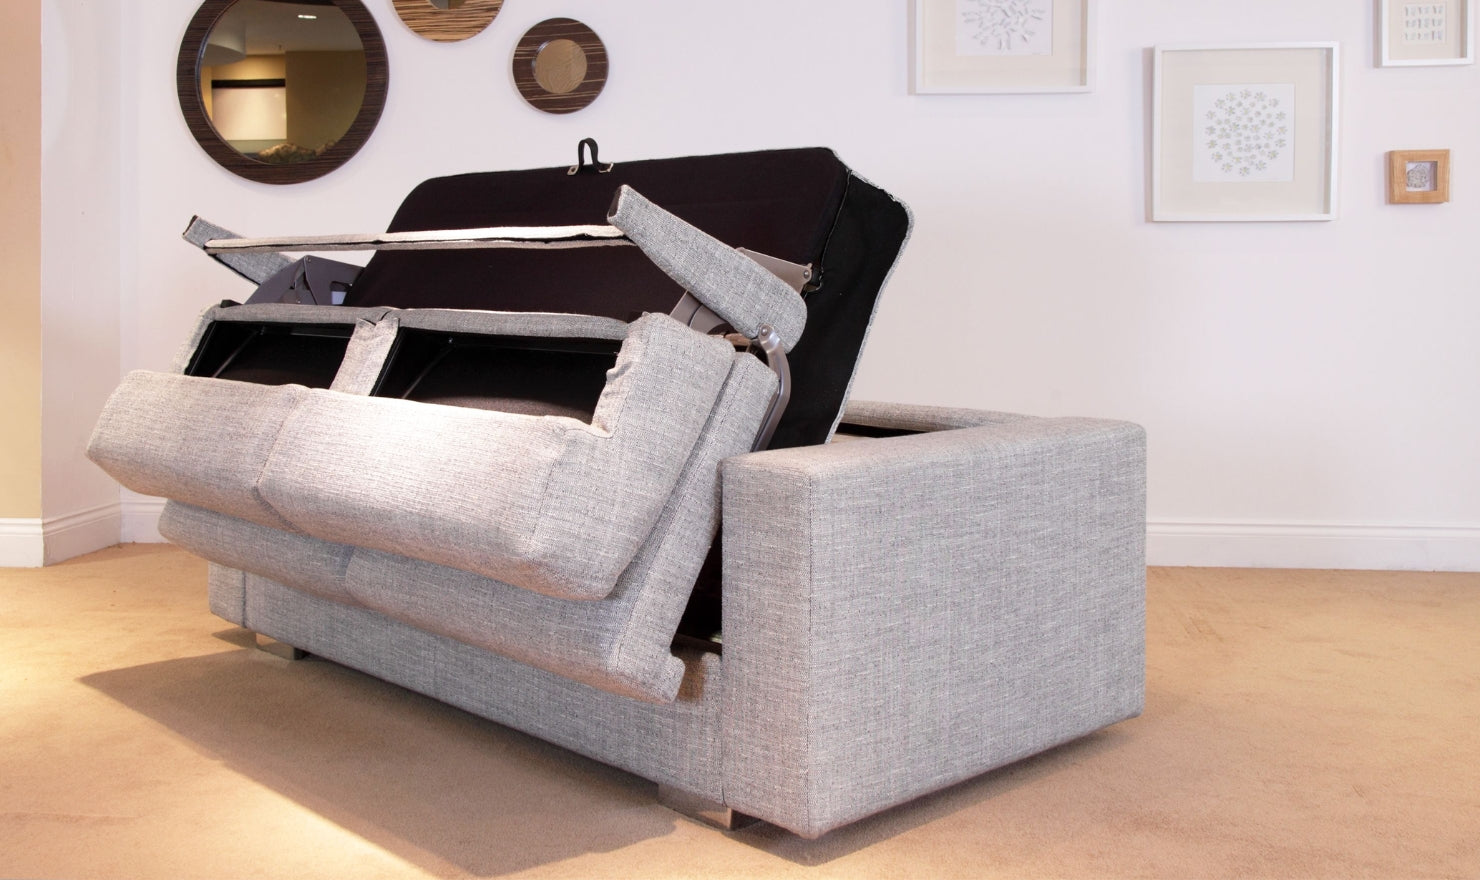 TIPS TO TAKE APART A SLEEPER SOFA FOR MOVING - Open Out the Sleeper Sofa